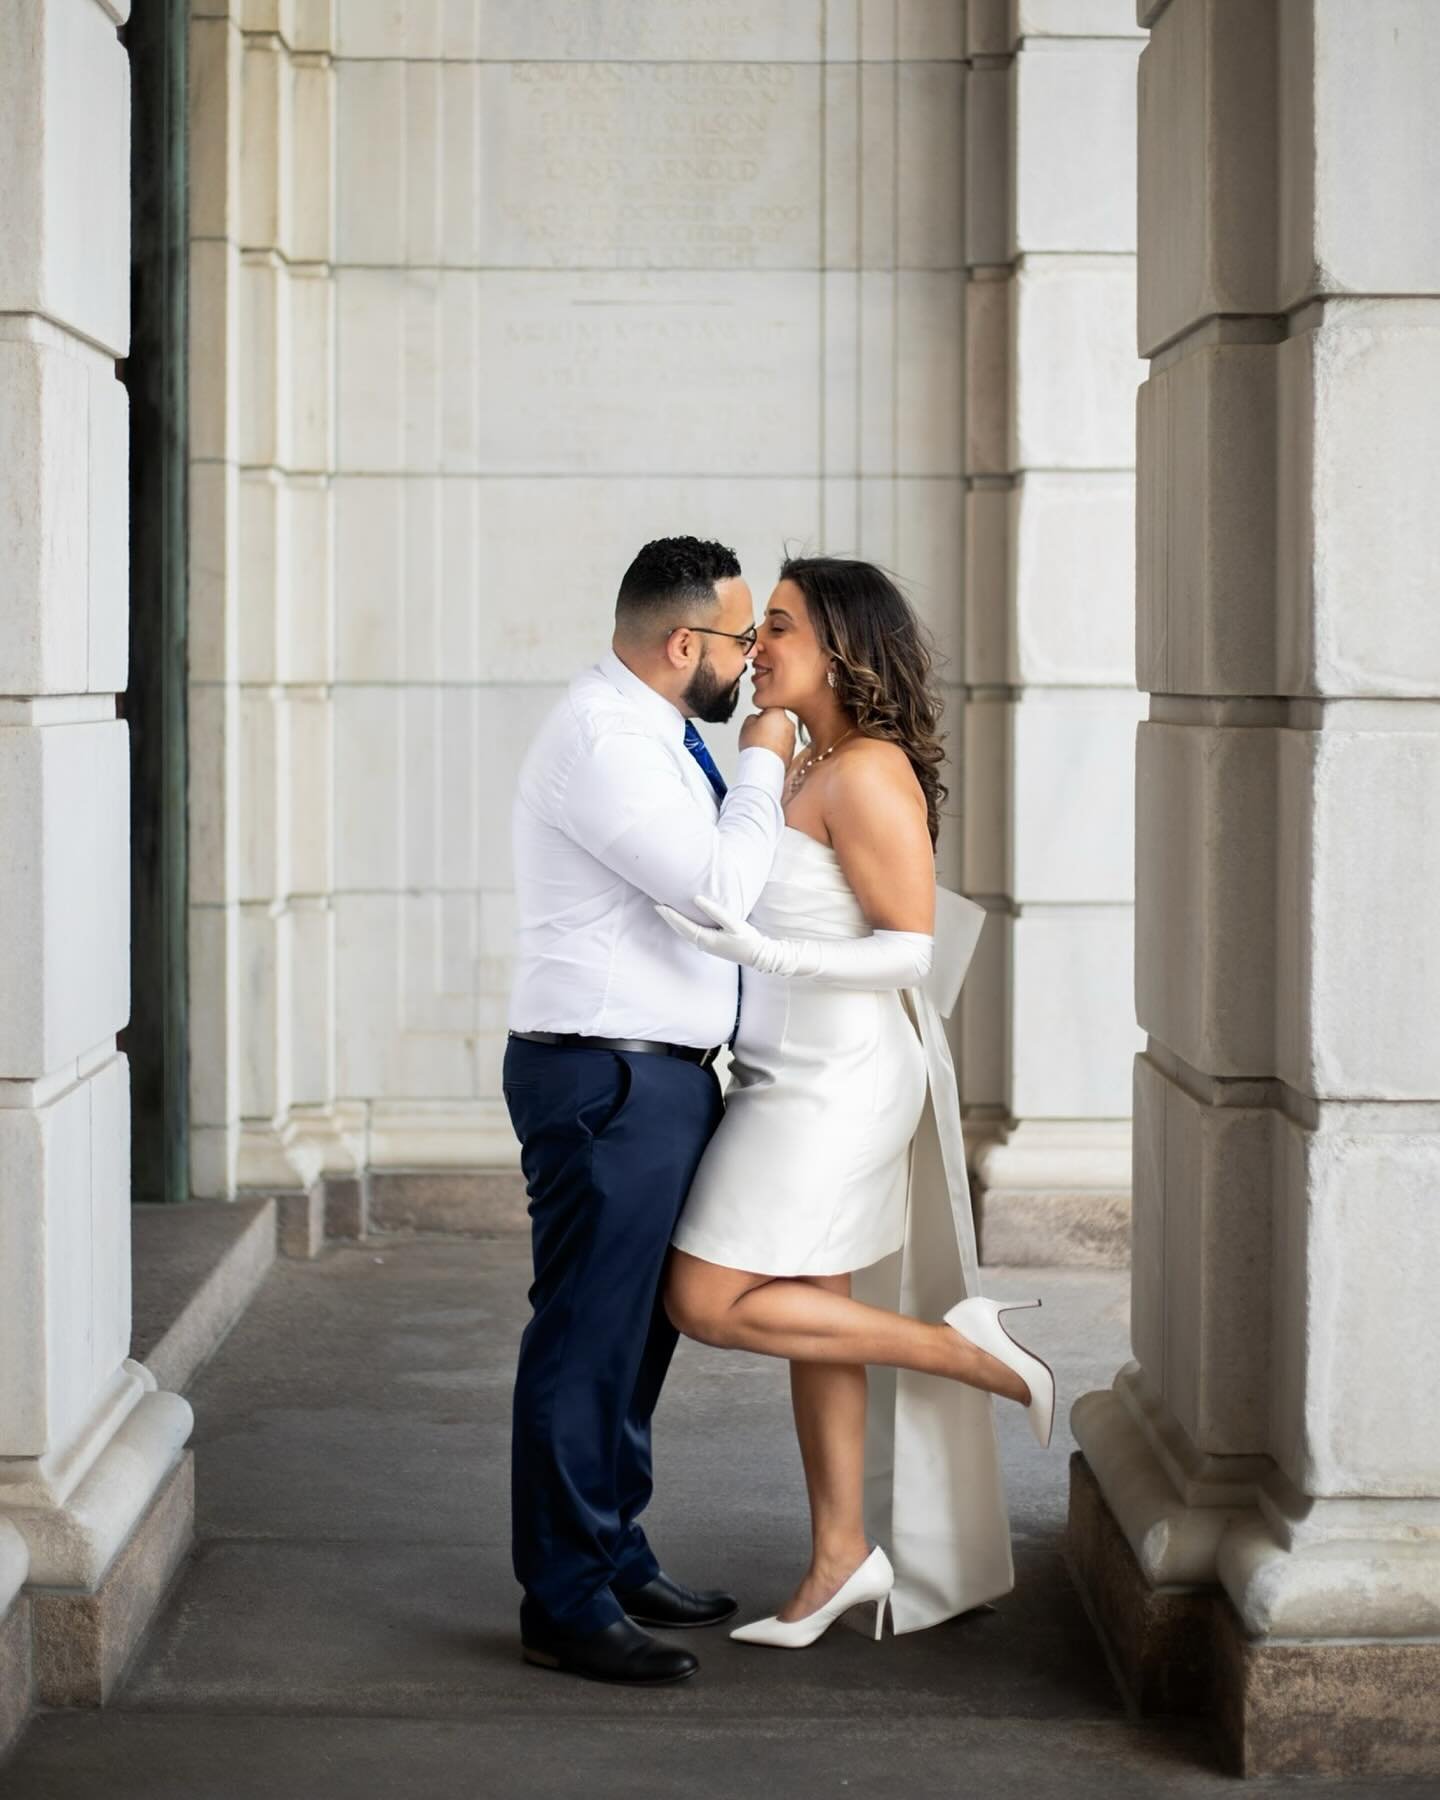 Fun fact: during this engagement session I told Crystal and Diony that they were giving me Madame President and First Man vibes! Anyone else agree?

Capturing an engagement session at the Rhode Island State House was a unique experience, despite the 